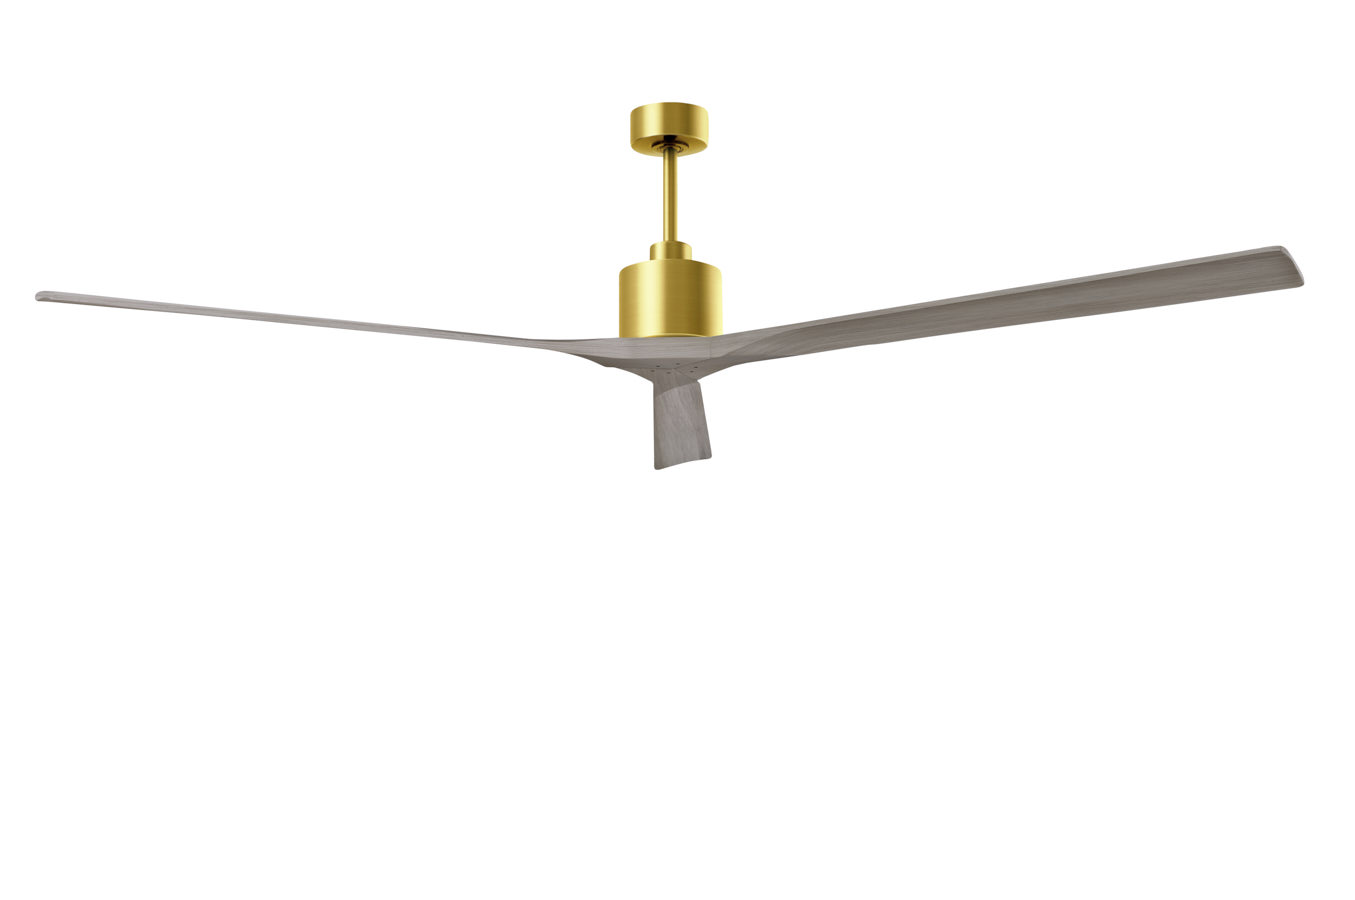 Nan XL ceiling fan in Brushed Brass with 90” Gray Ash blades